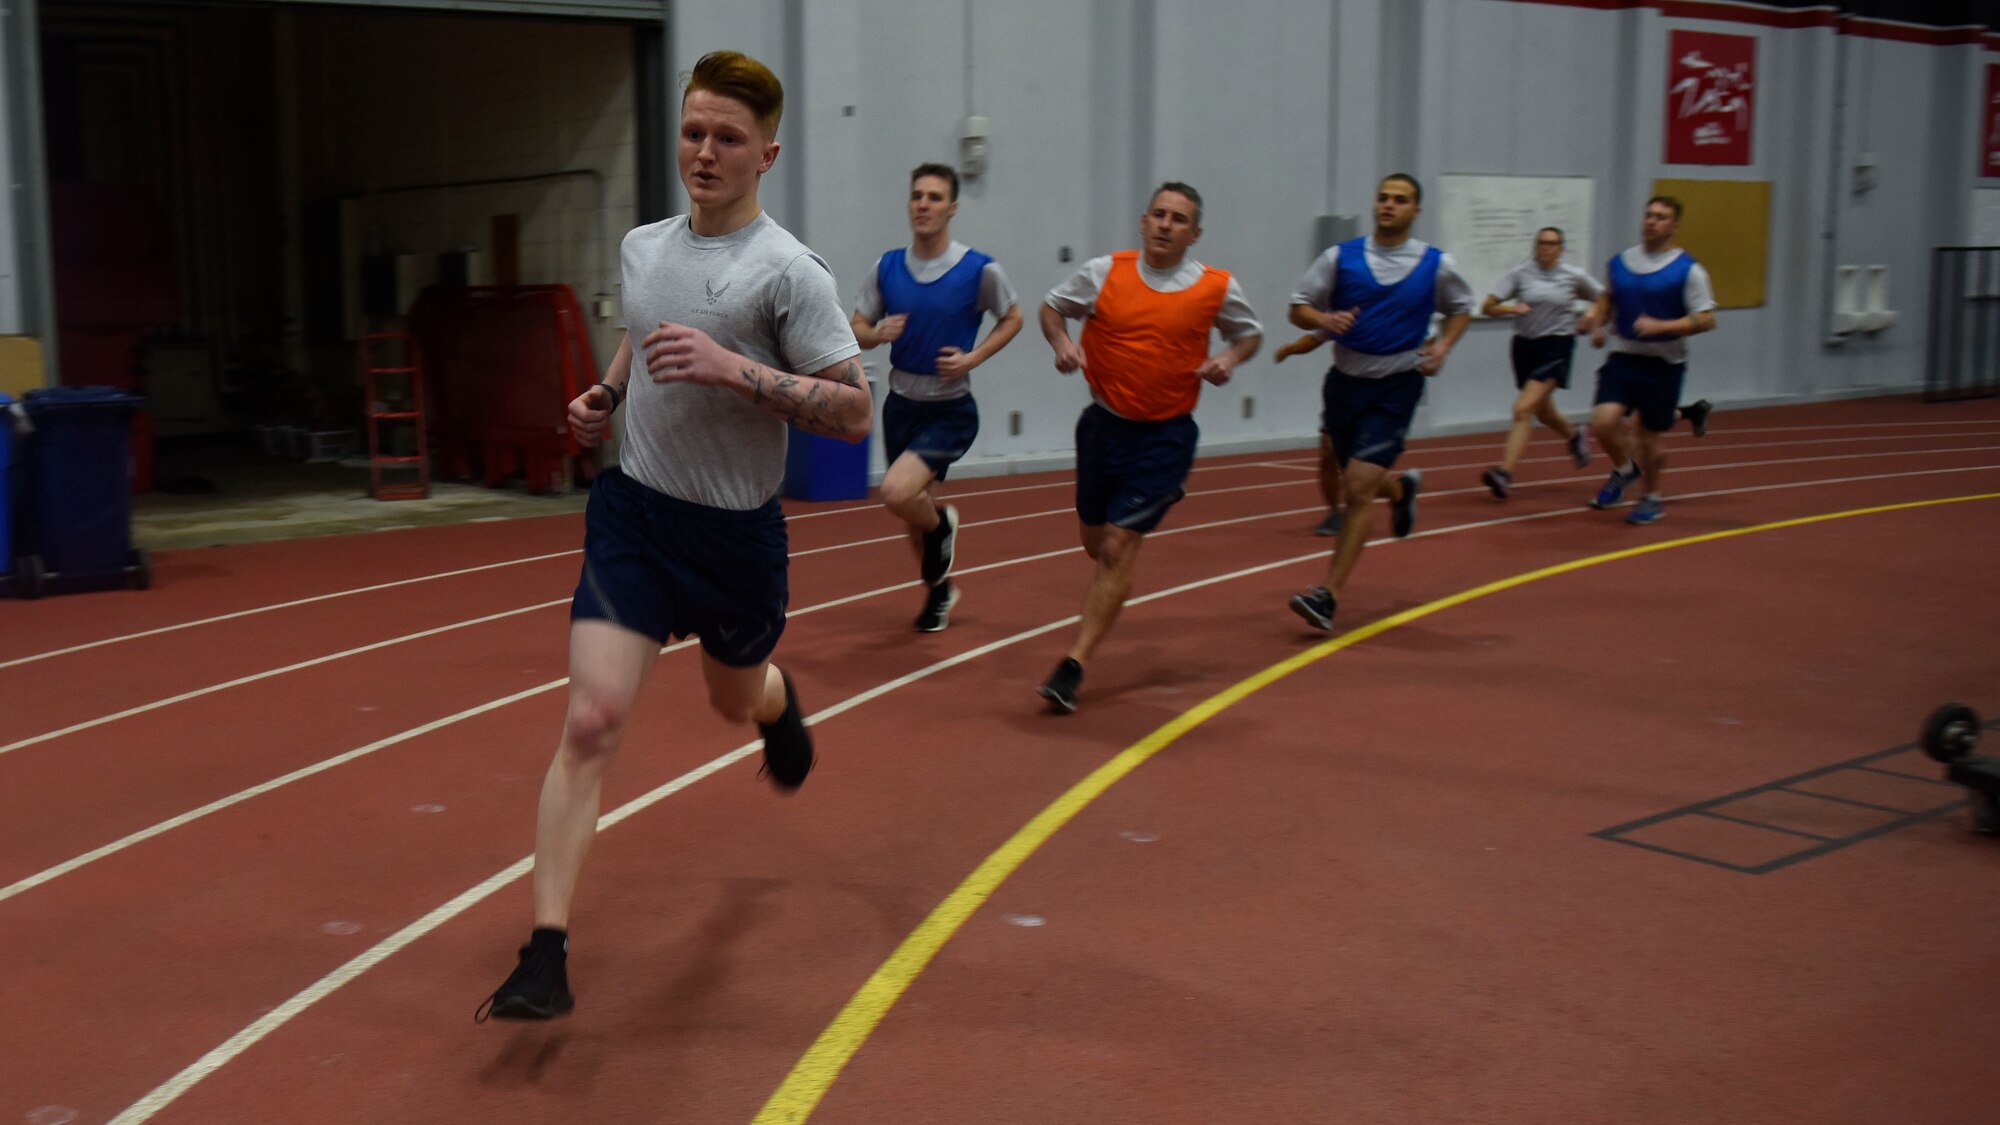 U.S. Air Force Airman 1st Class Tyler Corter, 92nd Medical Operations Squadron medical technician, and fellow Airmen from Fairchild, perform the 1,000-meter run as part of the German Armed Proficiency Badge competition Nov. 17, 2018, at Eastern Washington University in Cheney, Washington. More than 160 service members from 23 different units throughout the Pacific Northwest participated in the event. (U.S. Air Force photo/Airman 1st Class Lawrence Sena)